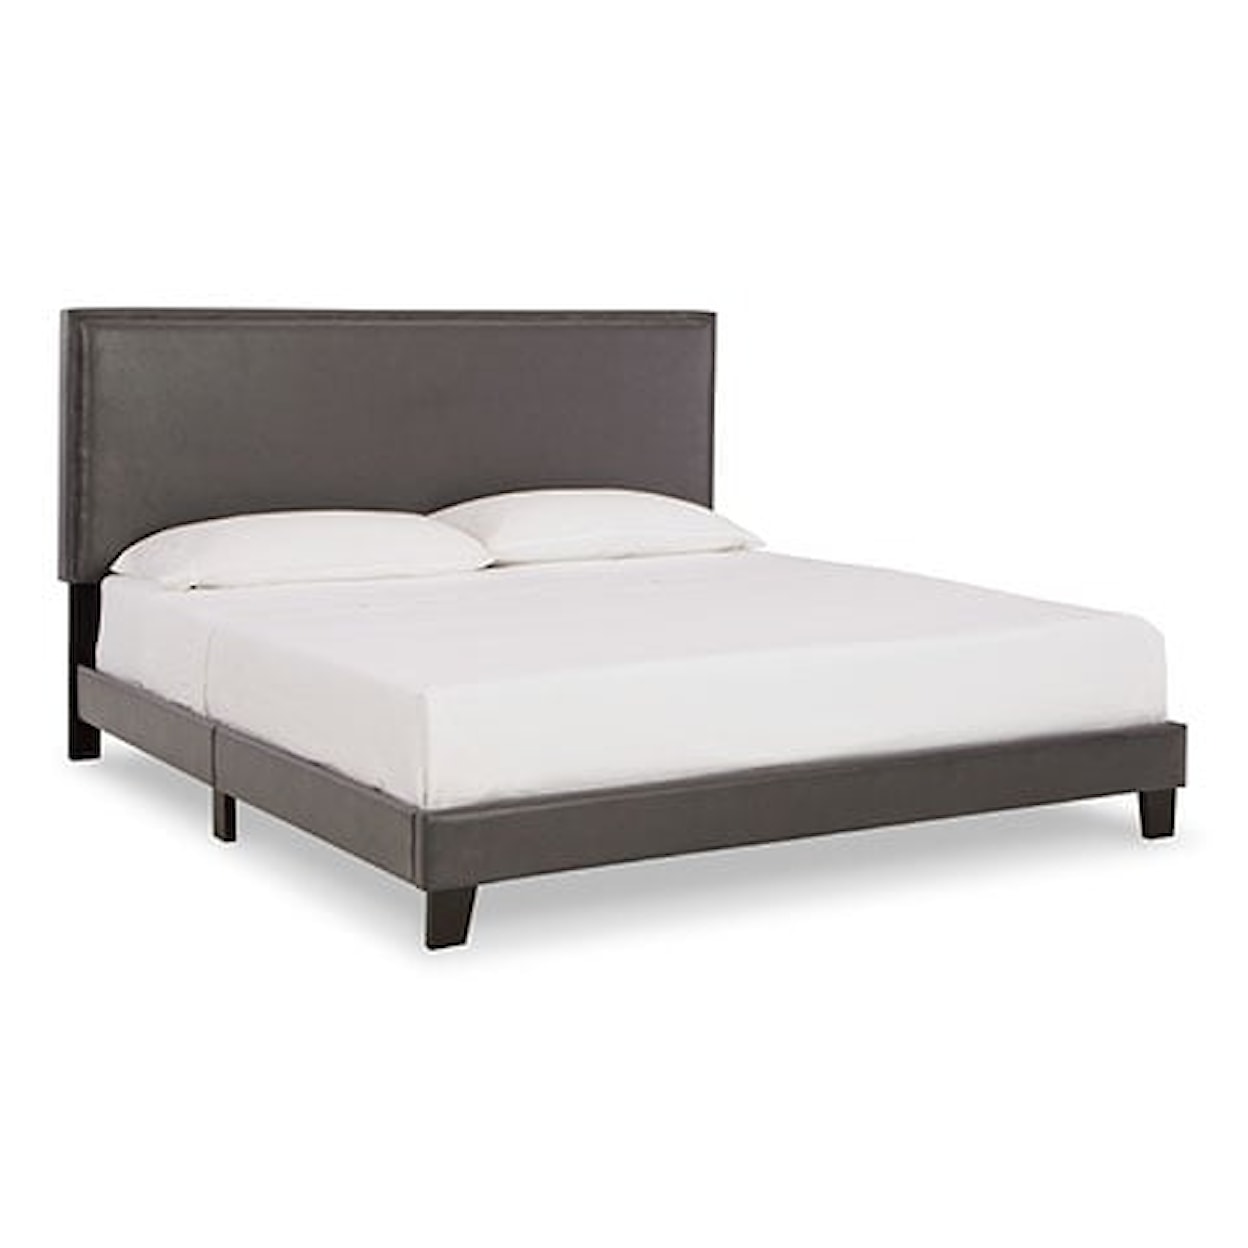 Signature Design by Ashley Mesling King Upholstered Bed